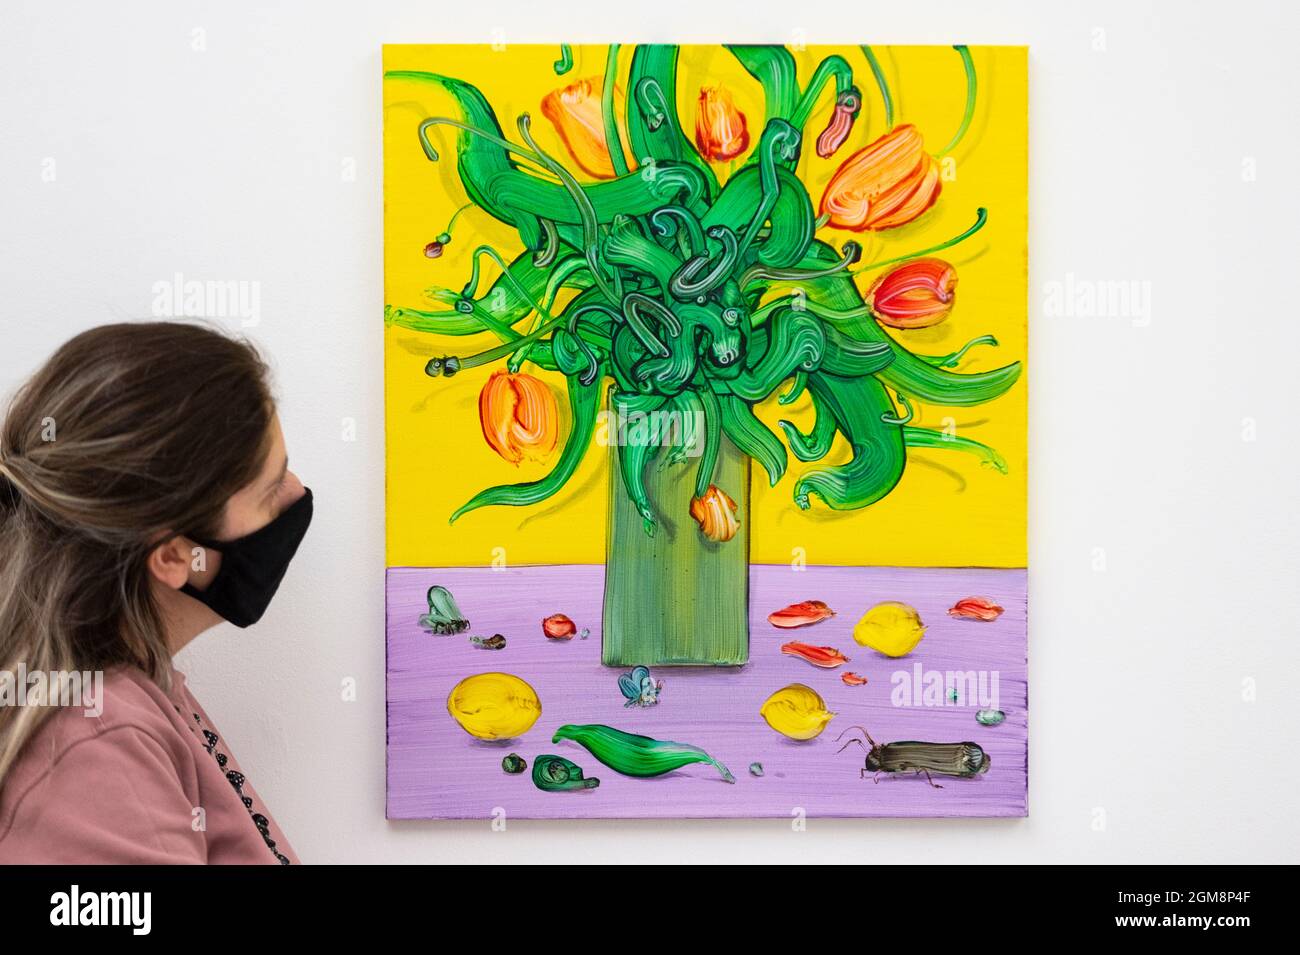 London, UK.  17 September 2021. 'Tulips and Lemons', 2019 by Mimei Thompson, part of In Bloom, a partner exhibition with the RHS Botanical Art & Photography Show 2021 Winners at the Saatchi Gallery. On show September 18 to October 3, 2021 in an event that runs parallel to the RHS Chelsea Flower Show, hosted for the first time in Autumn.  Credit: Stephen Chung / Alamy Live News Stock Photo